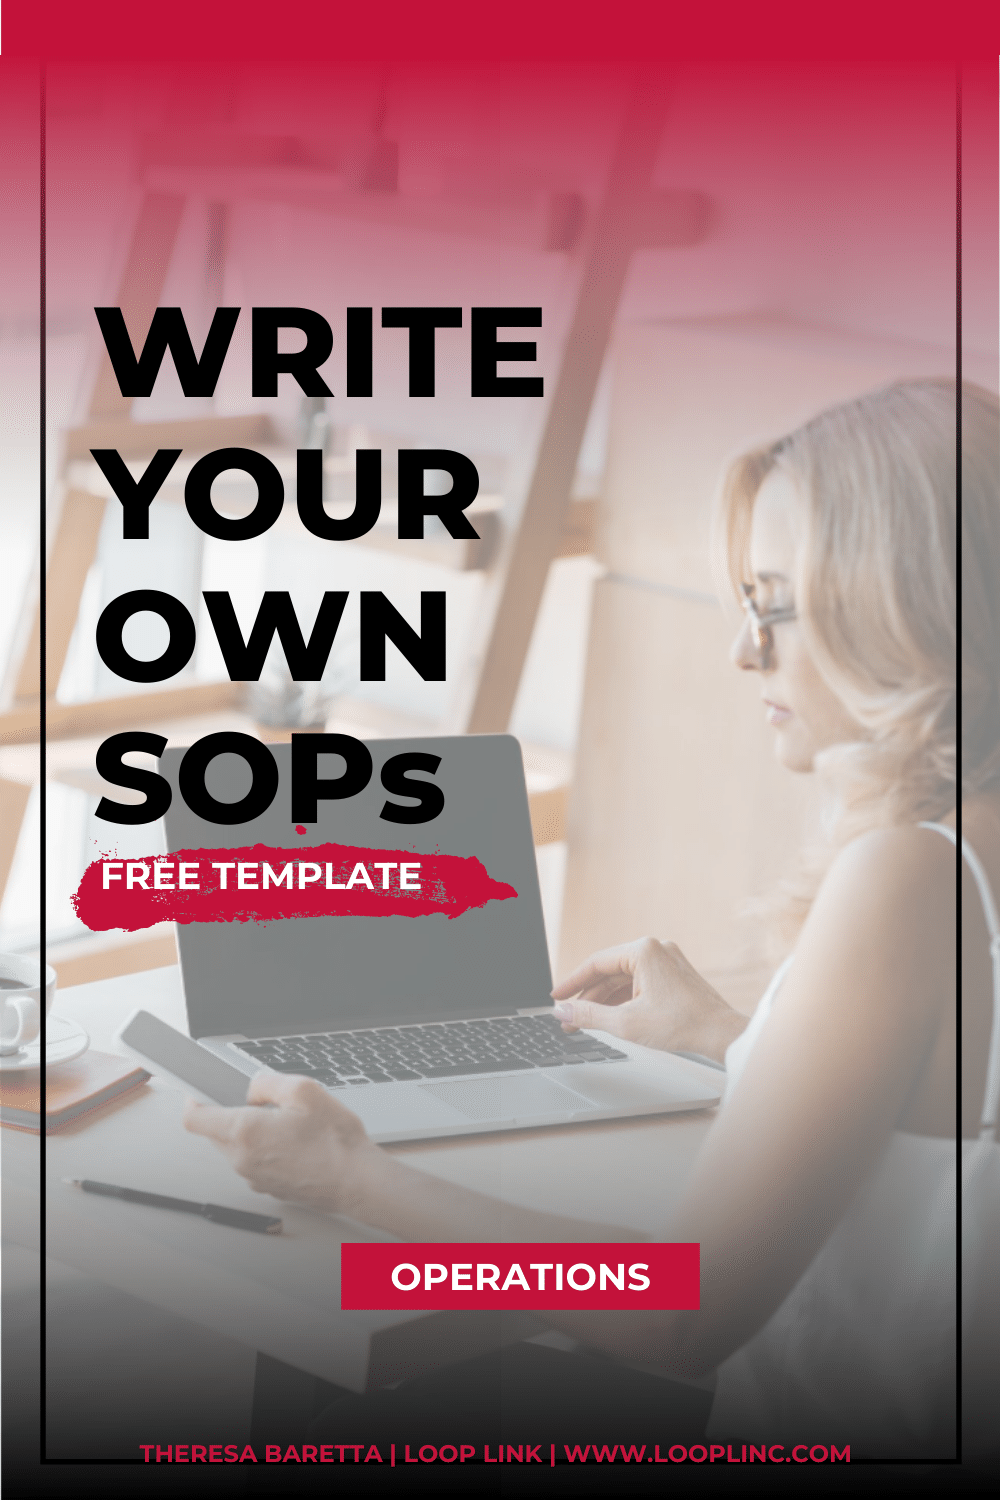 Write Your Own Standard Operating Procedure (SOP) FREE TEMPLATE